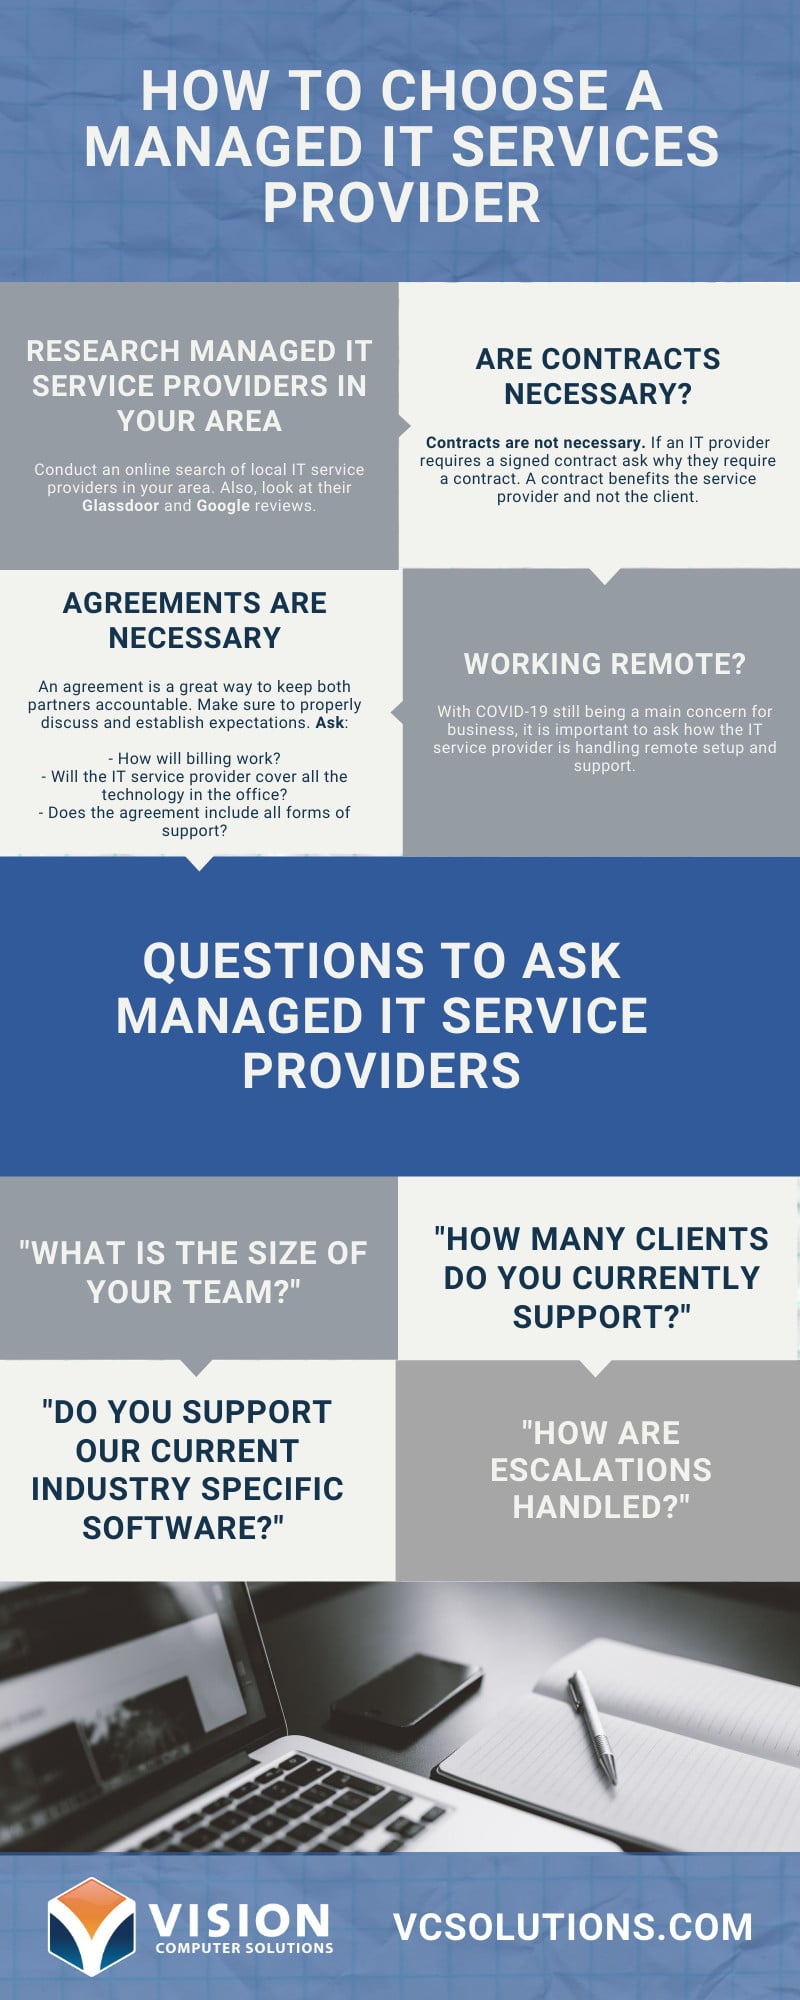 How to Choose a Managed IT Services Provider Infographic